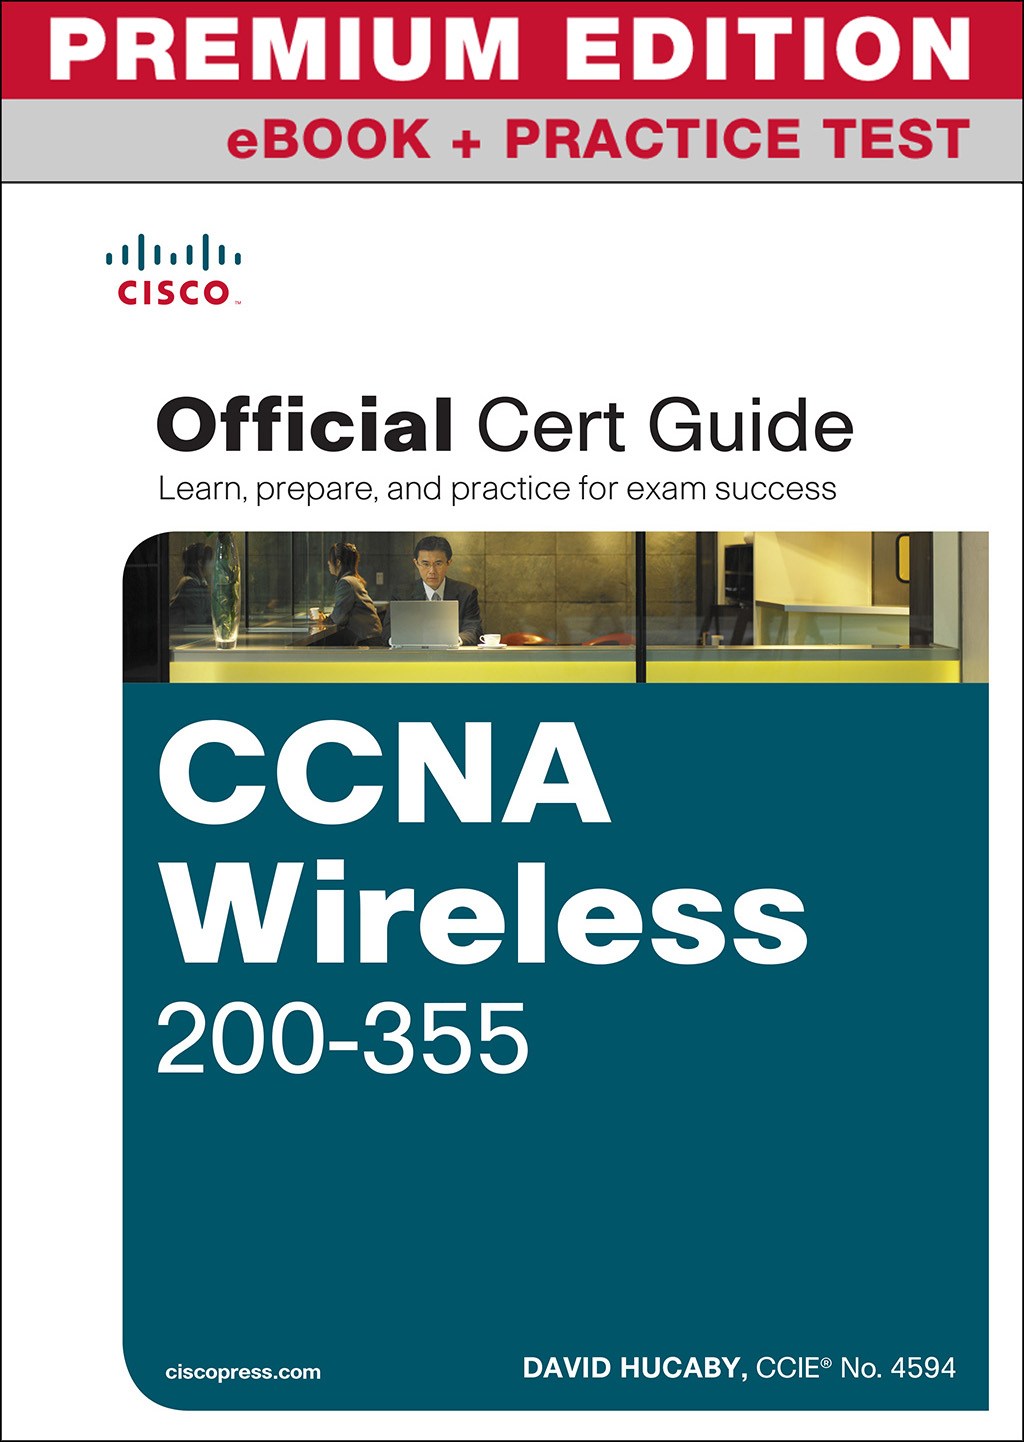 CCNA Wireless 200-355 Official Cert Guide Premium Edition and Practice Test